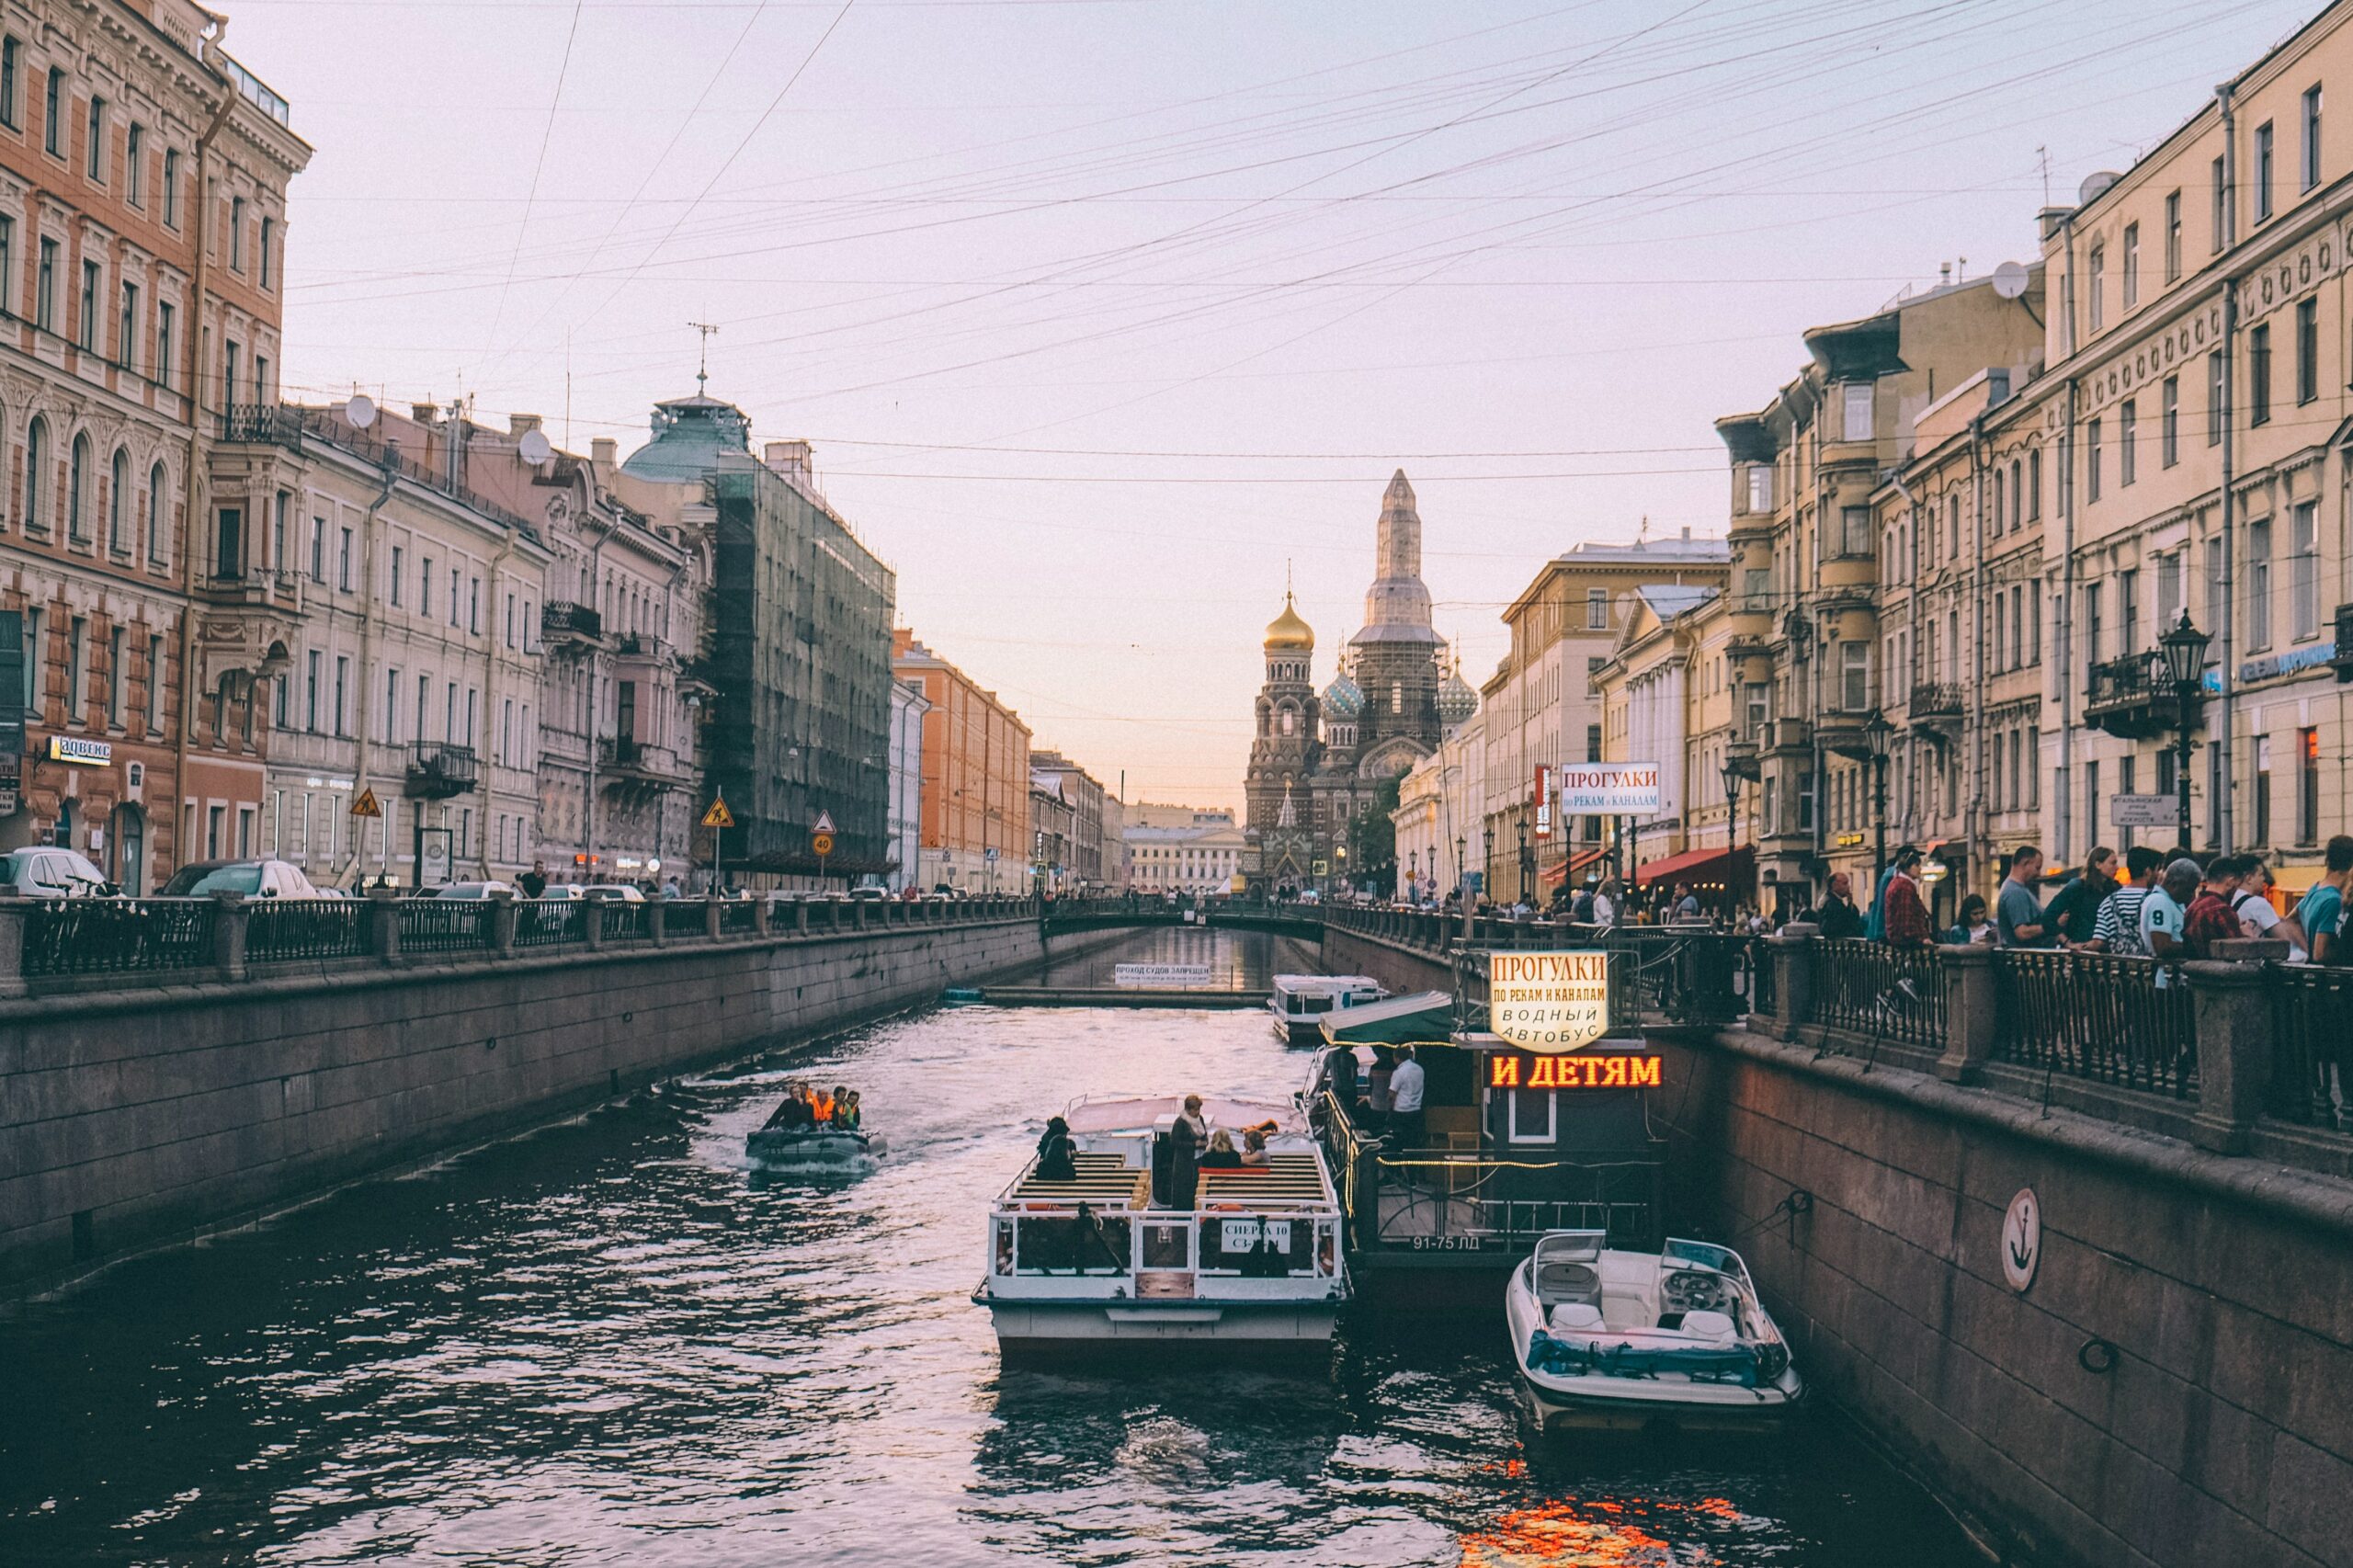 St. Petersburg canal